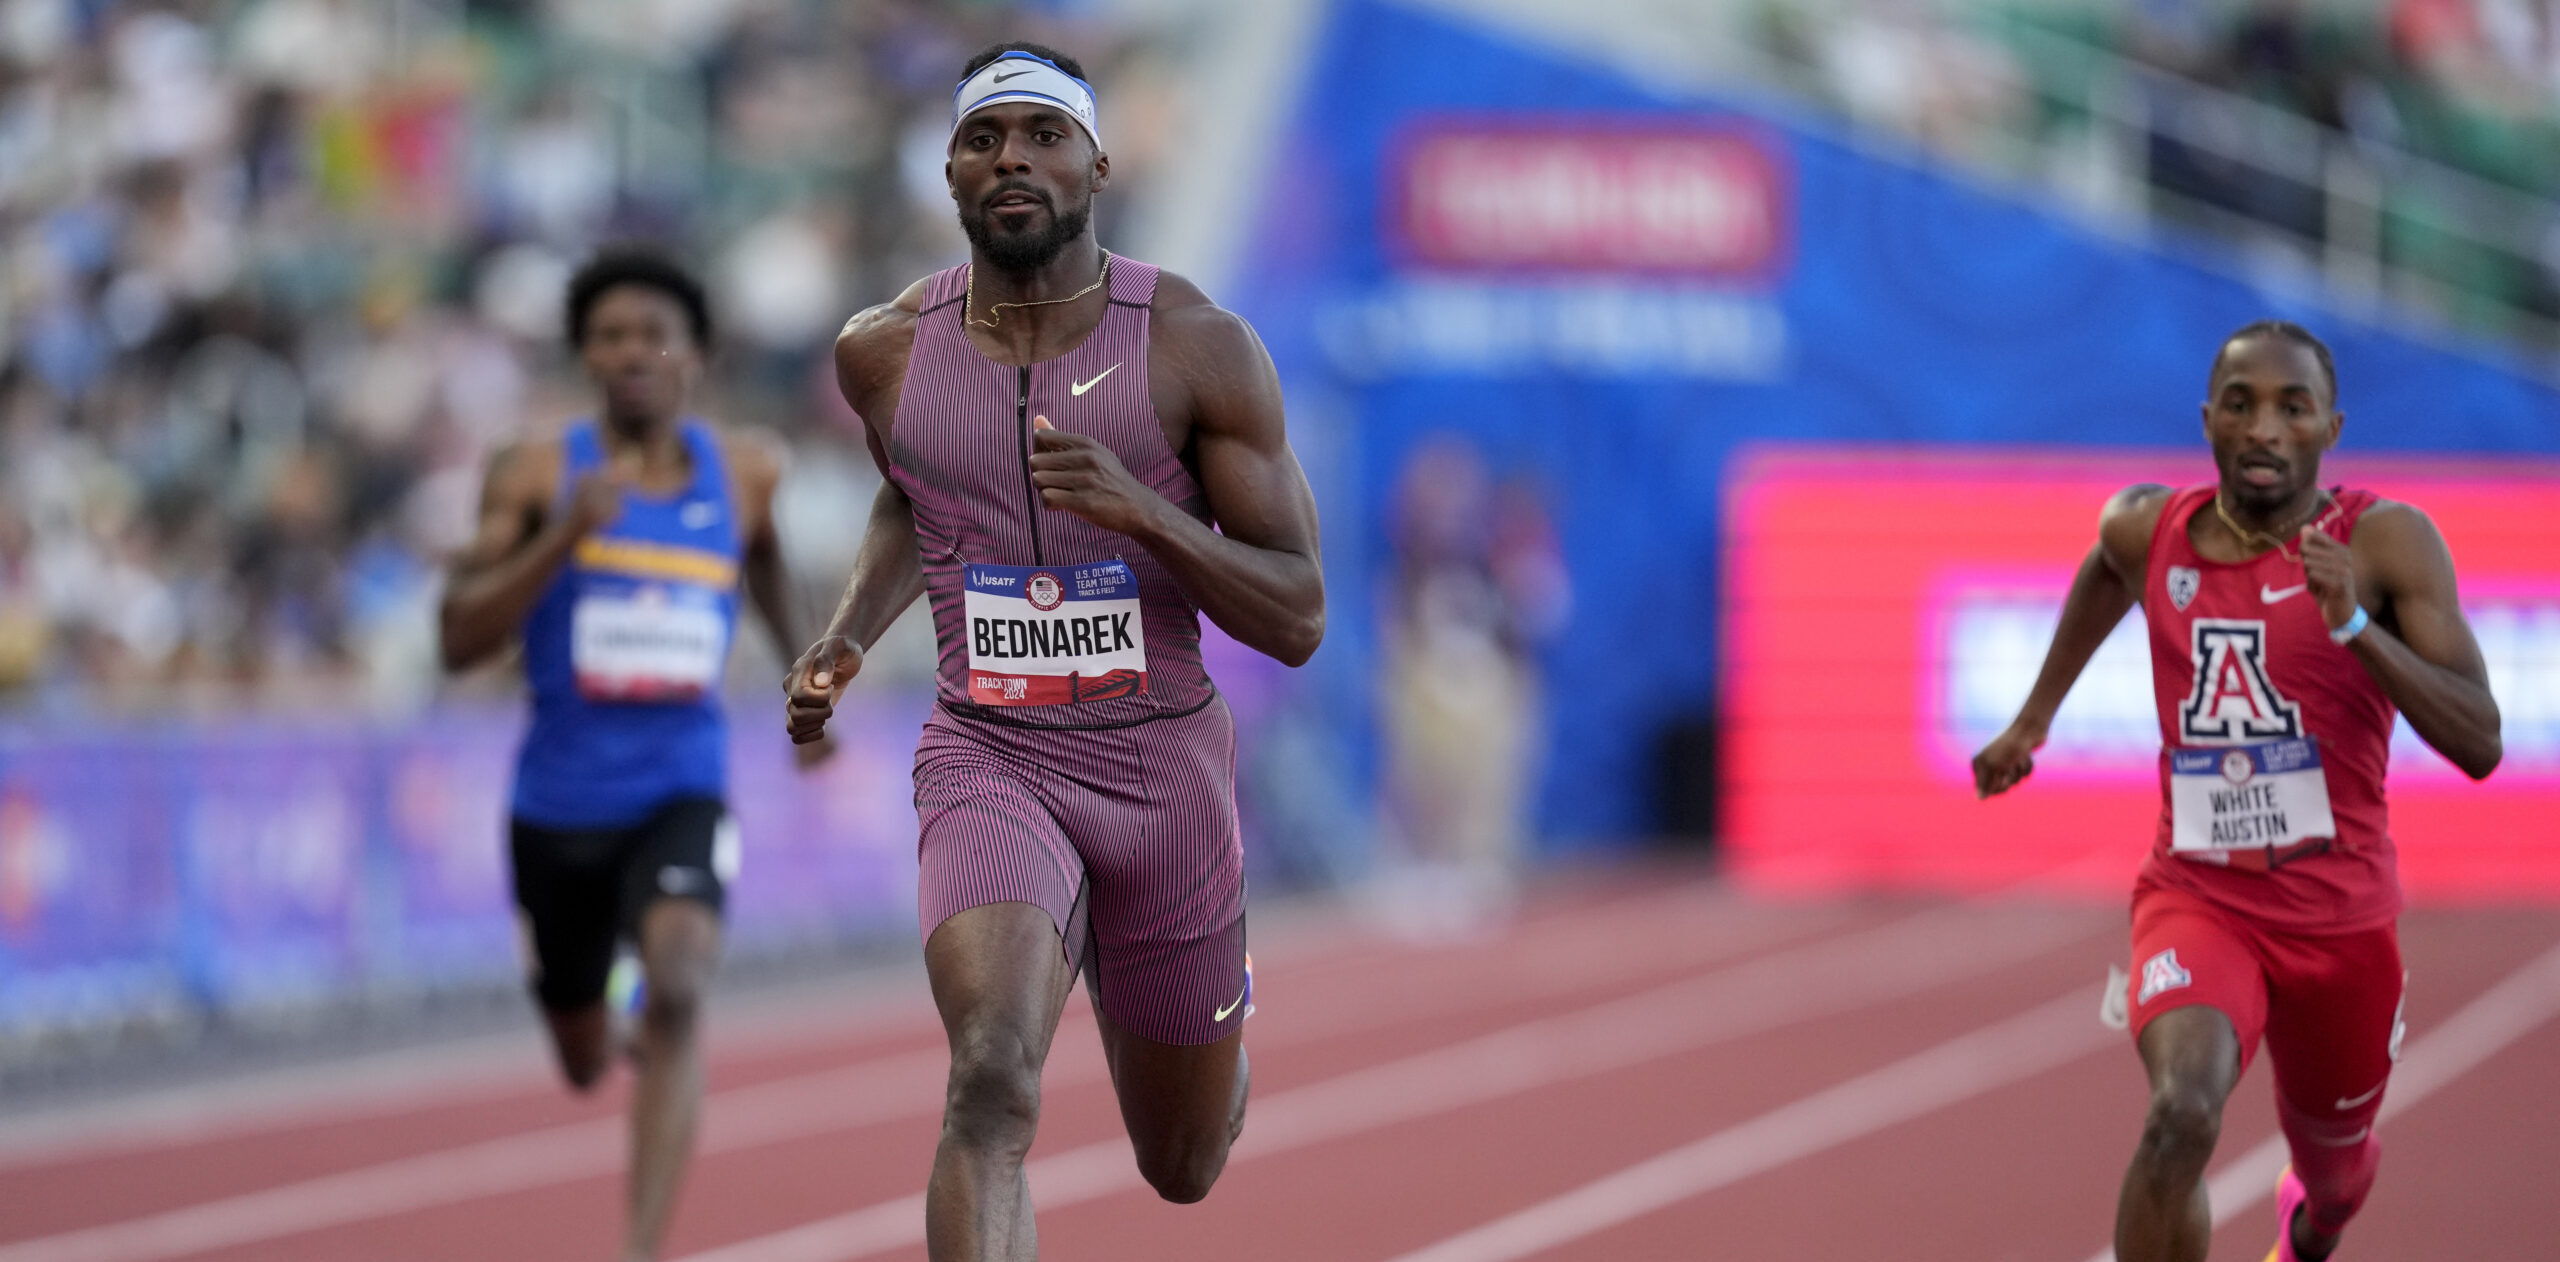 Kenny Bednarek wins a heat in the men's 200-meter run during the U.S. Track and Field Olympic Team Trials Thursday, June 27, 2024, in Eugene, Ore. (AP Photo/Charlie Neibergall)